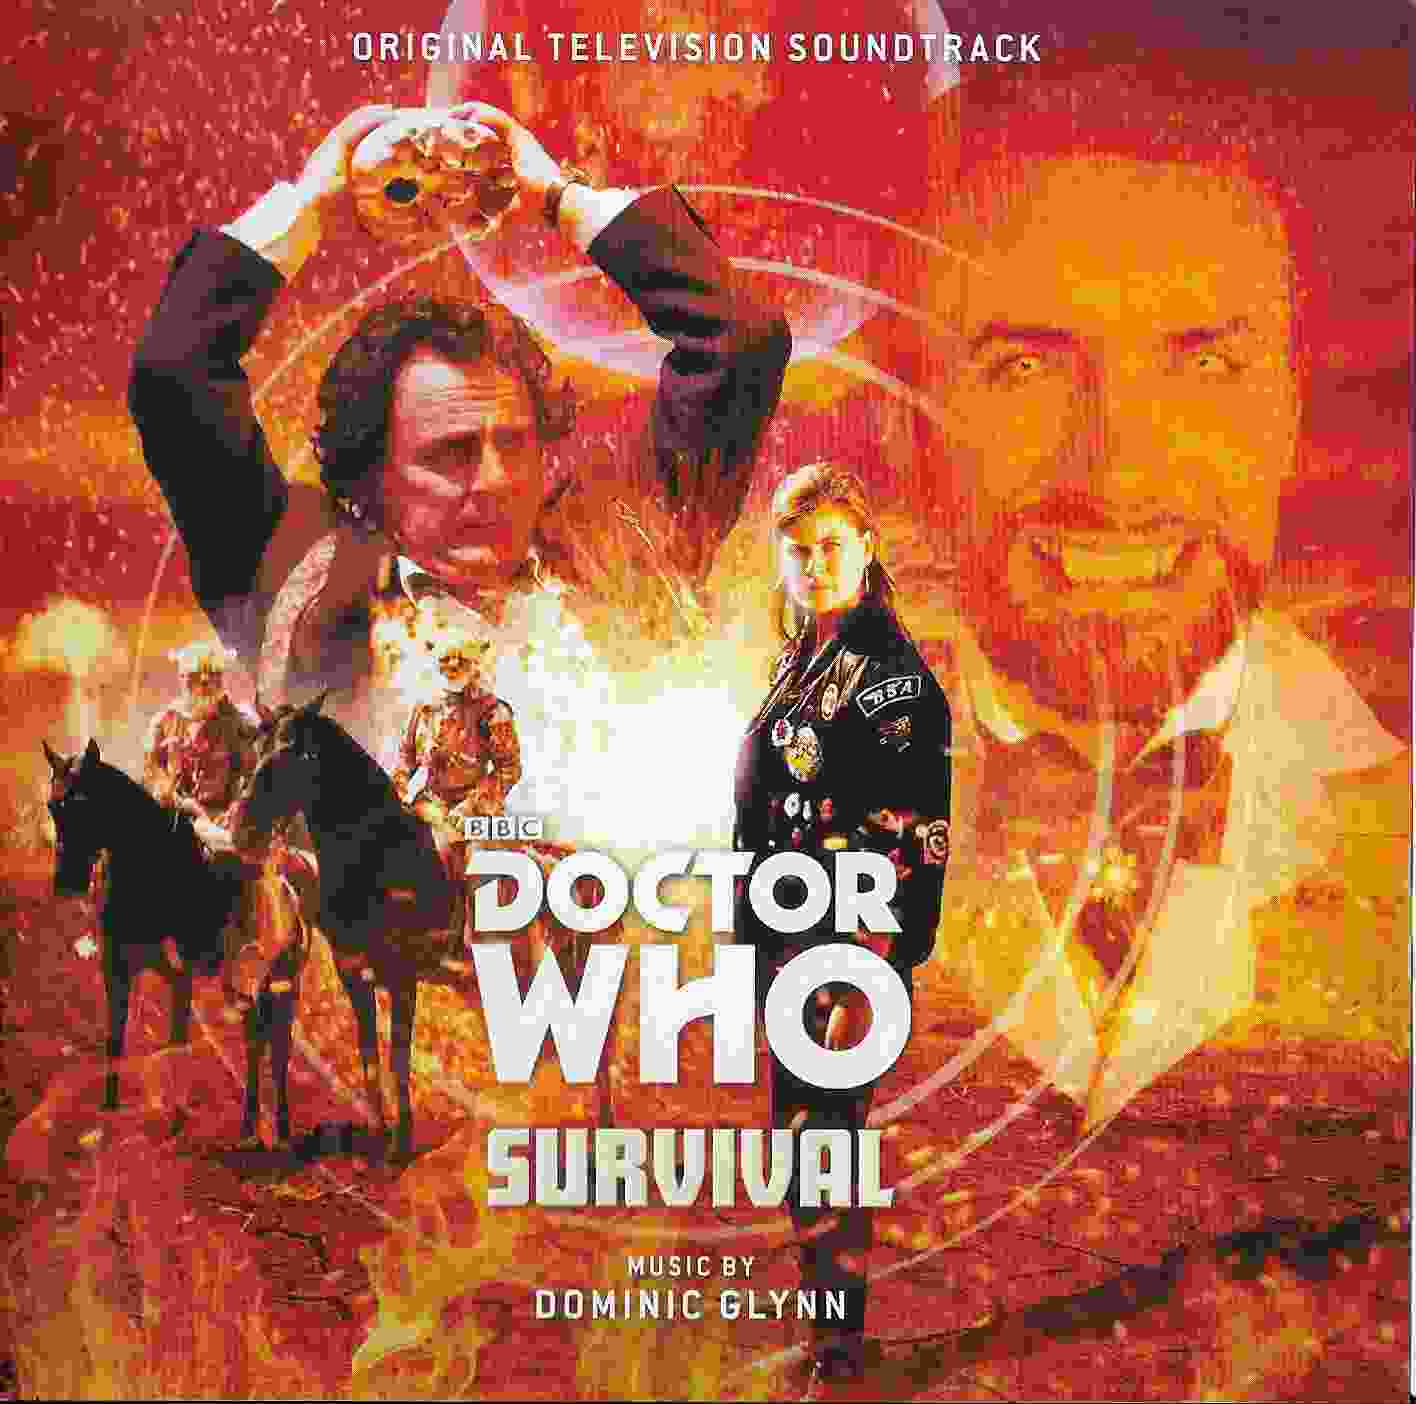 Picture of SILCD 1537 Doctor Who - Survival by artist Dominic Glynn from the BBC records and Tapes library